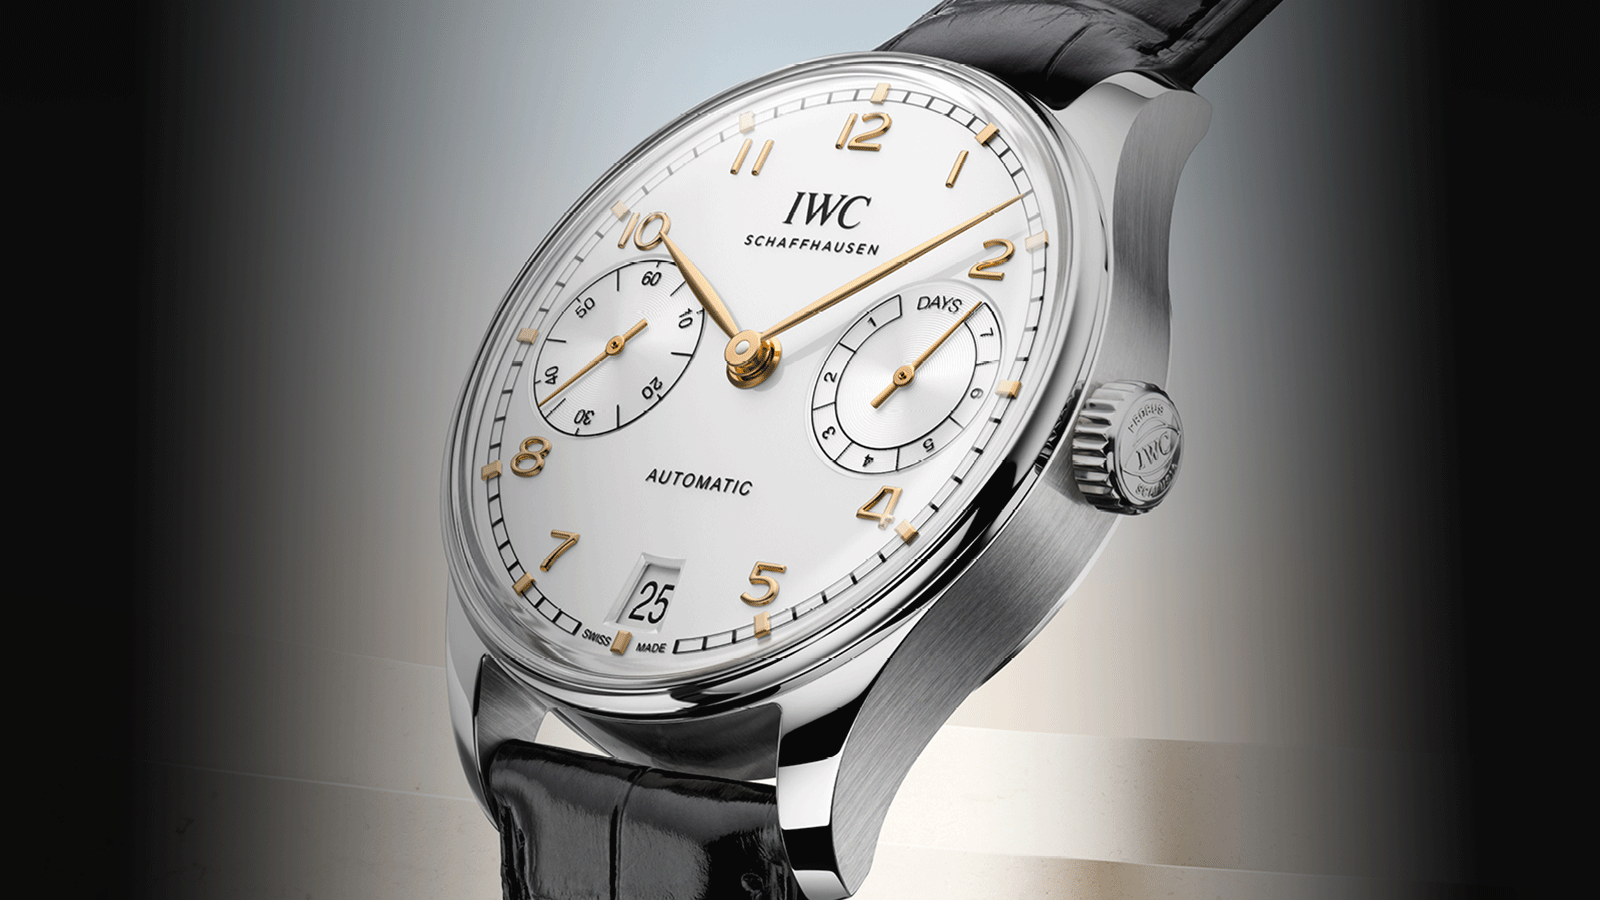 With the new Portugieser Automatic 42, IWC Schaffhausen now launches a timeless and modern instrument dress watch, which fully retains the DNA of the original Portugieser Automatic from the year 2000.